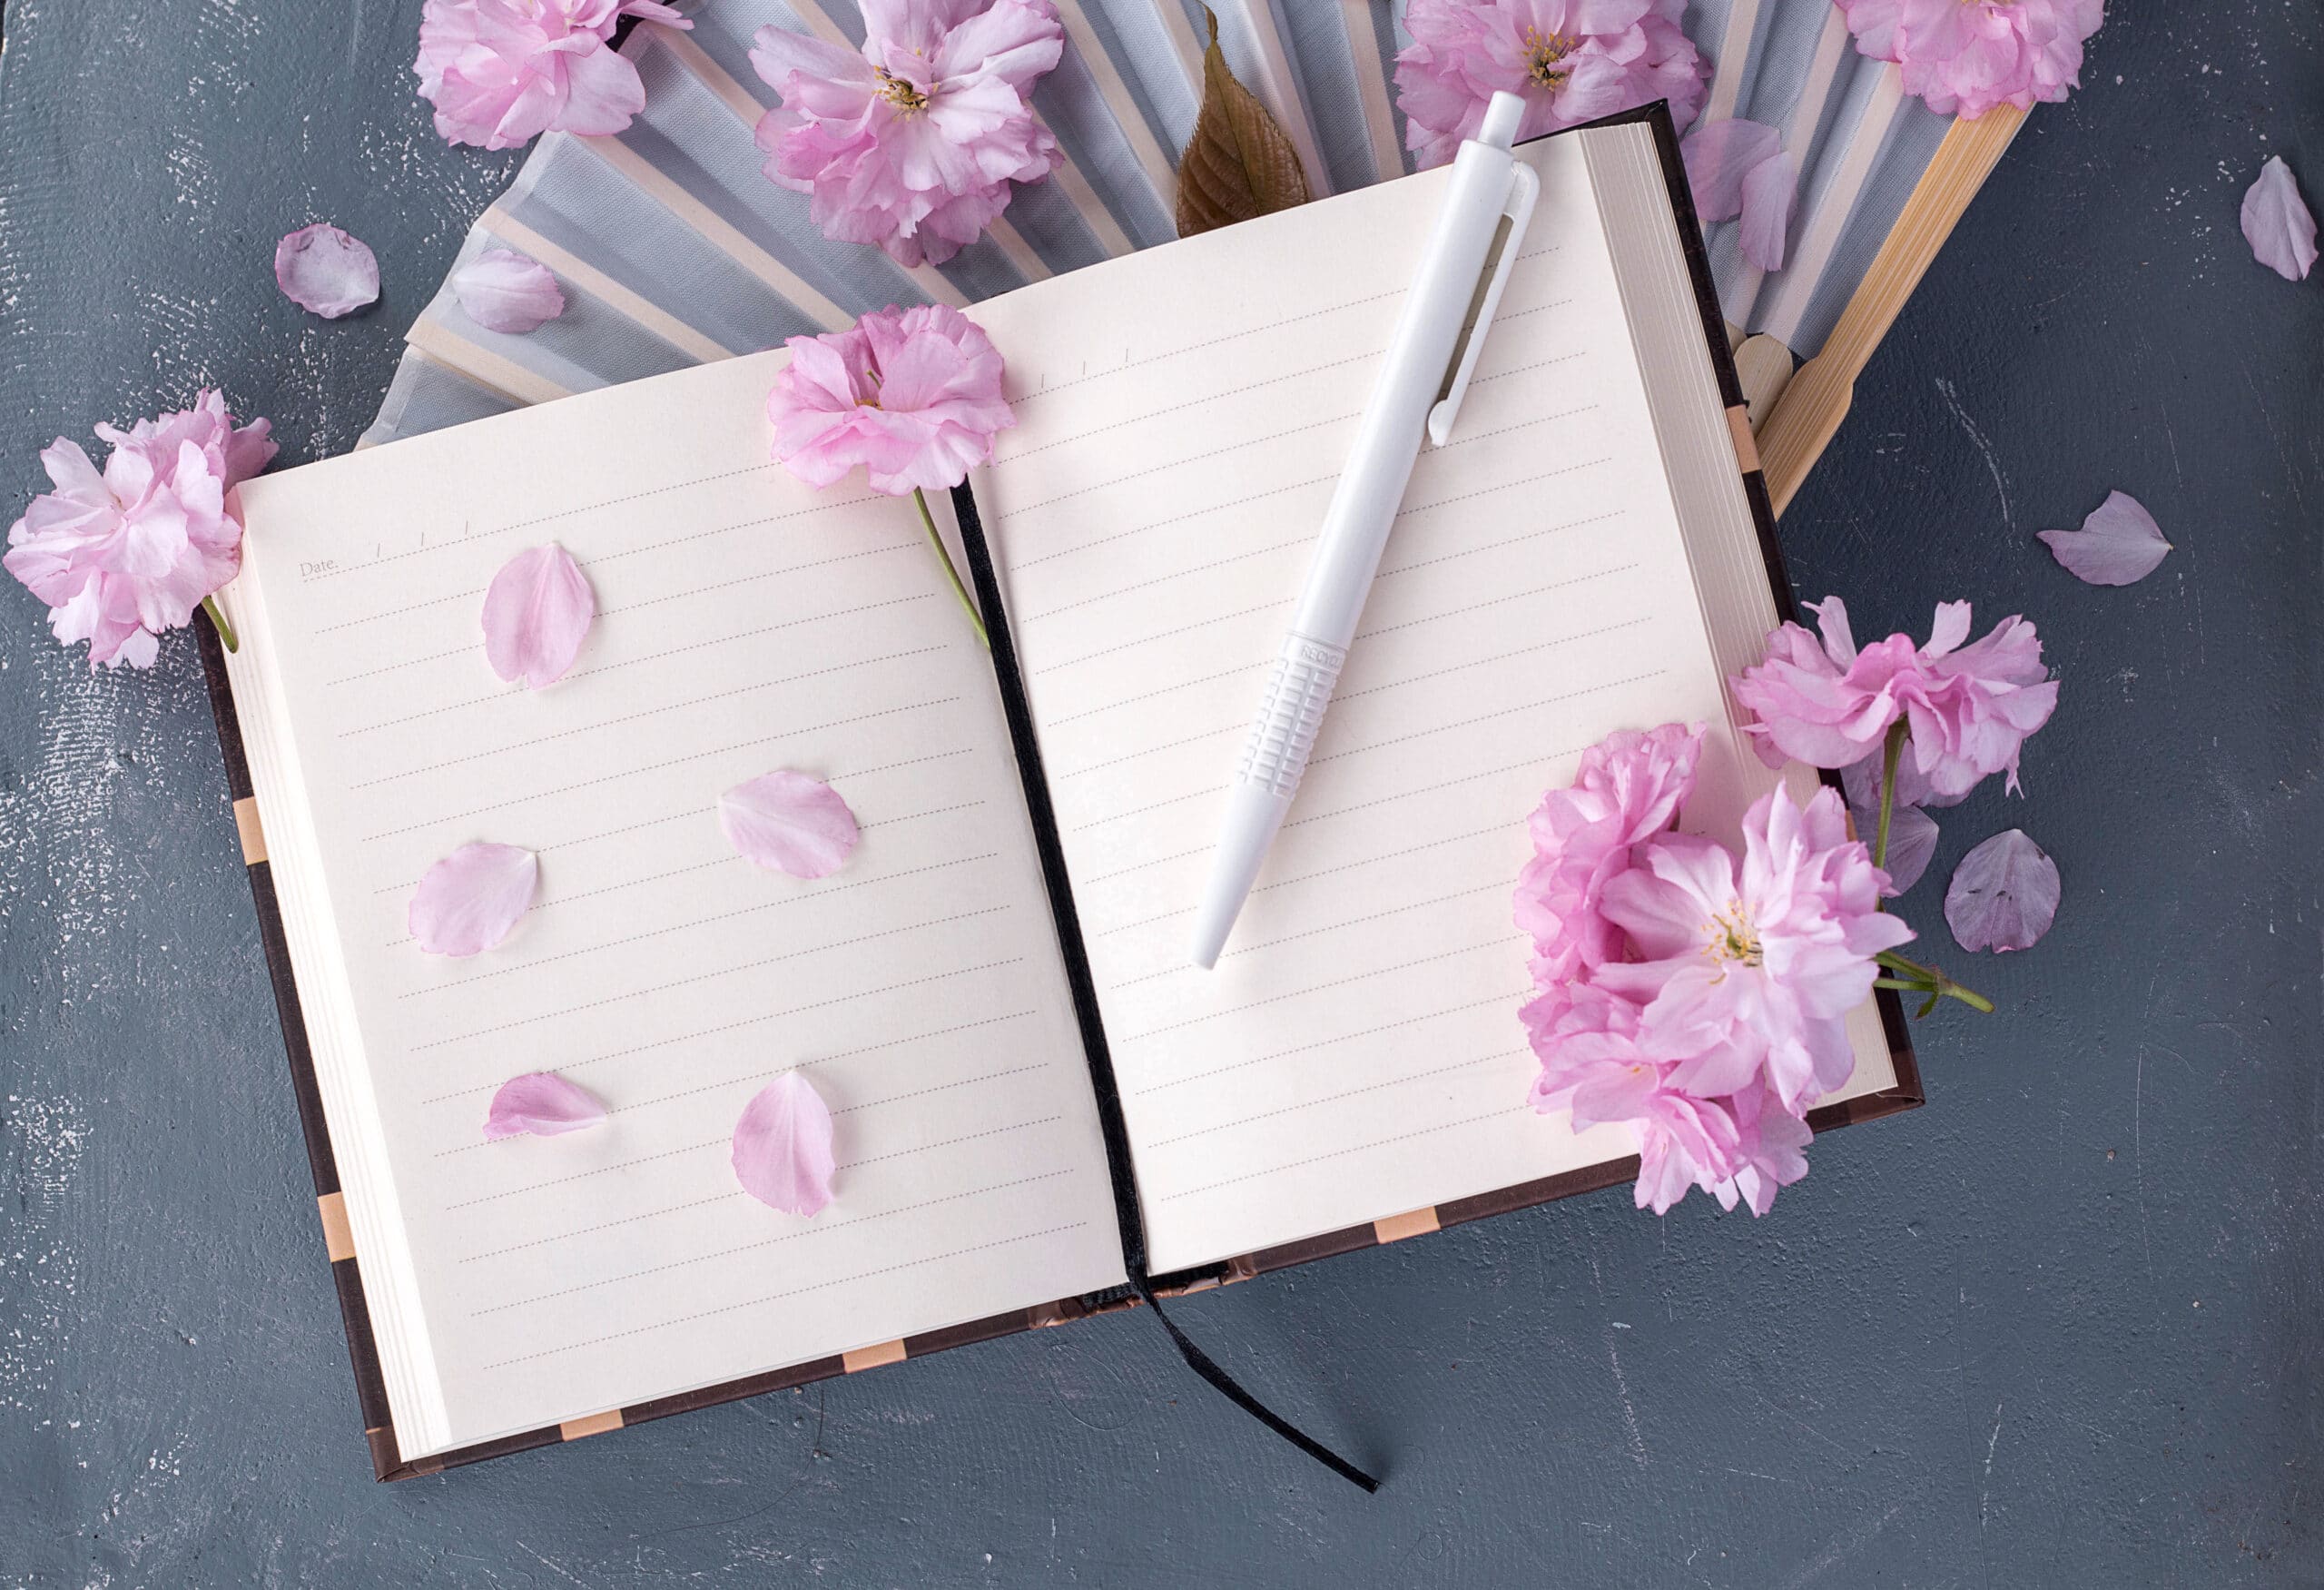 Sakura flowers and note book with a pen